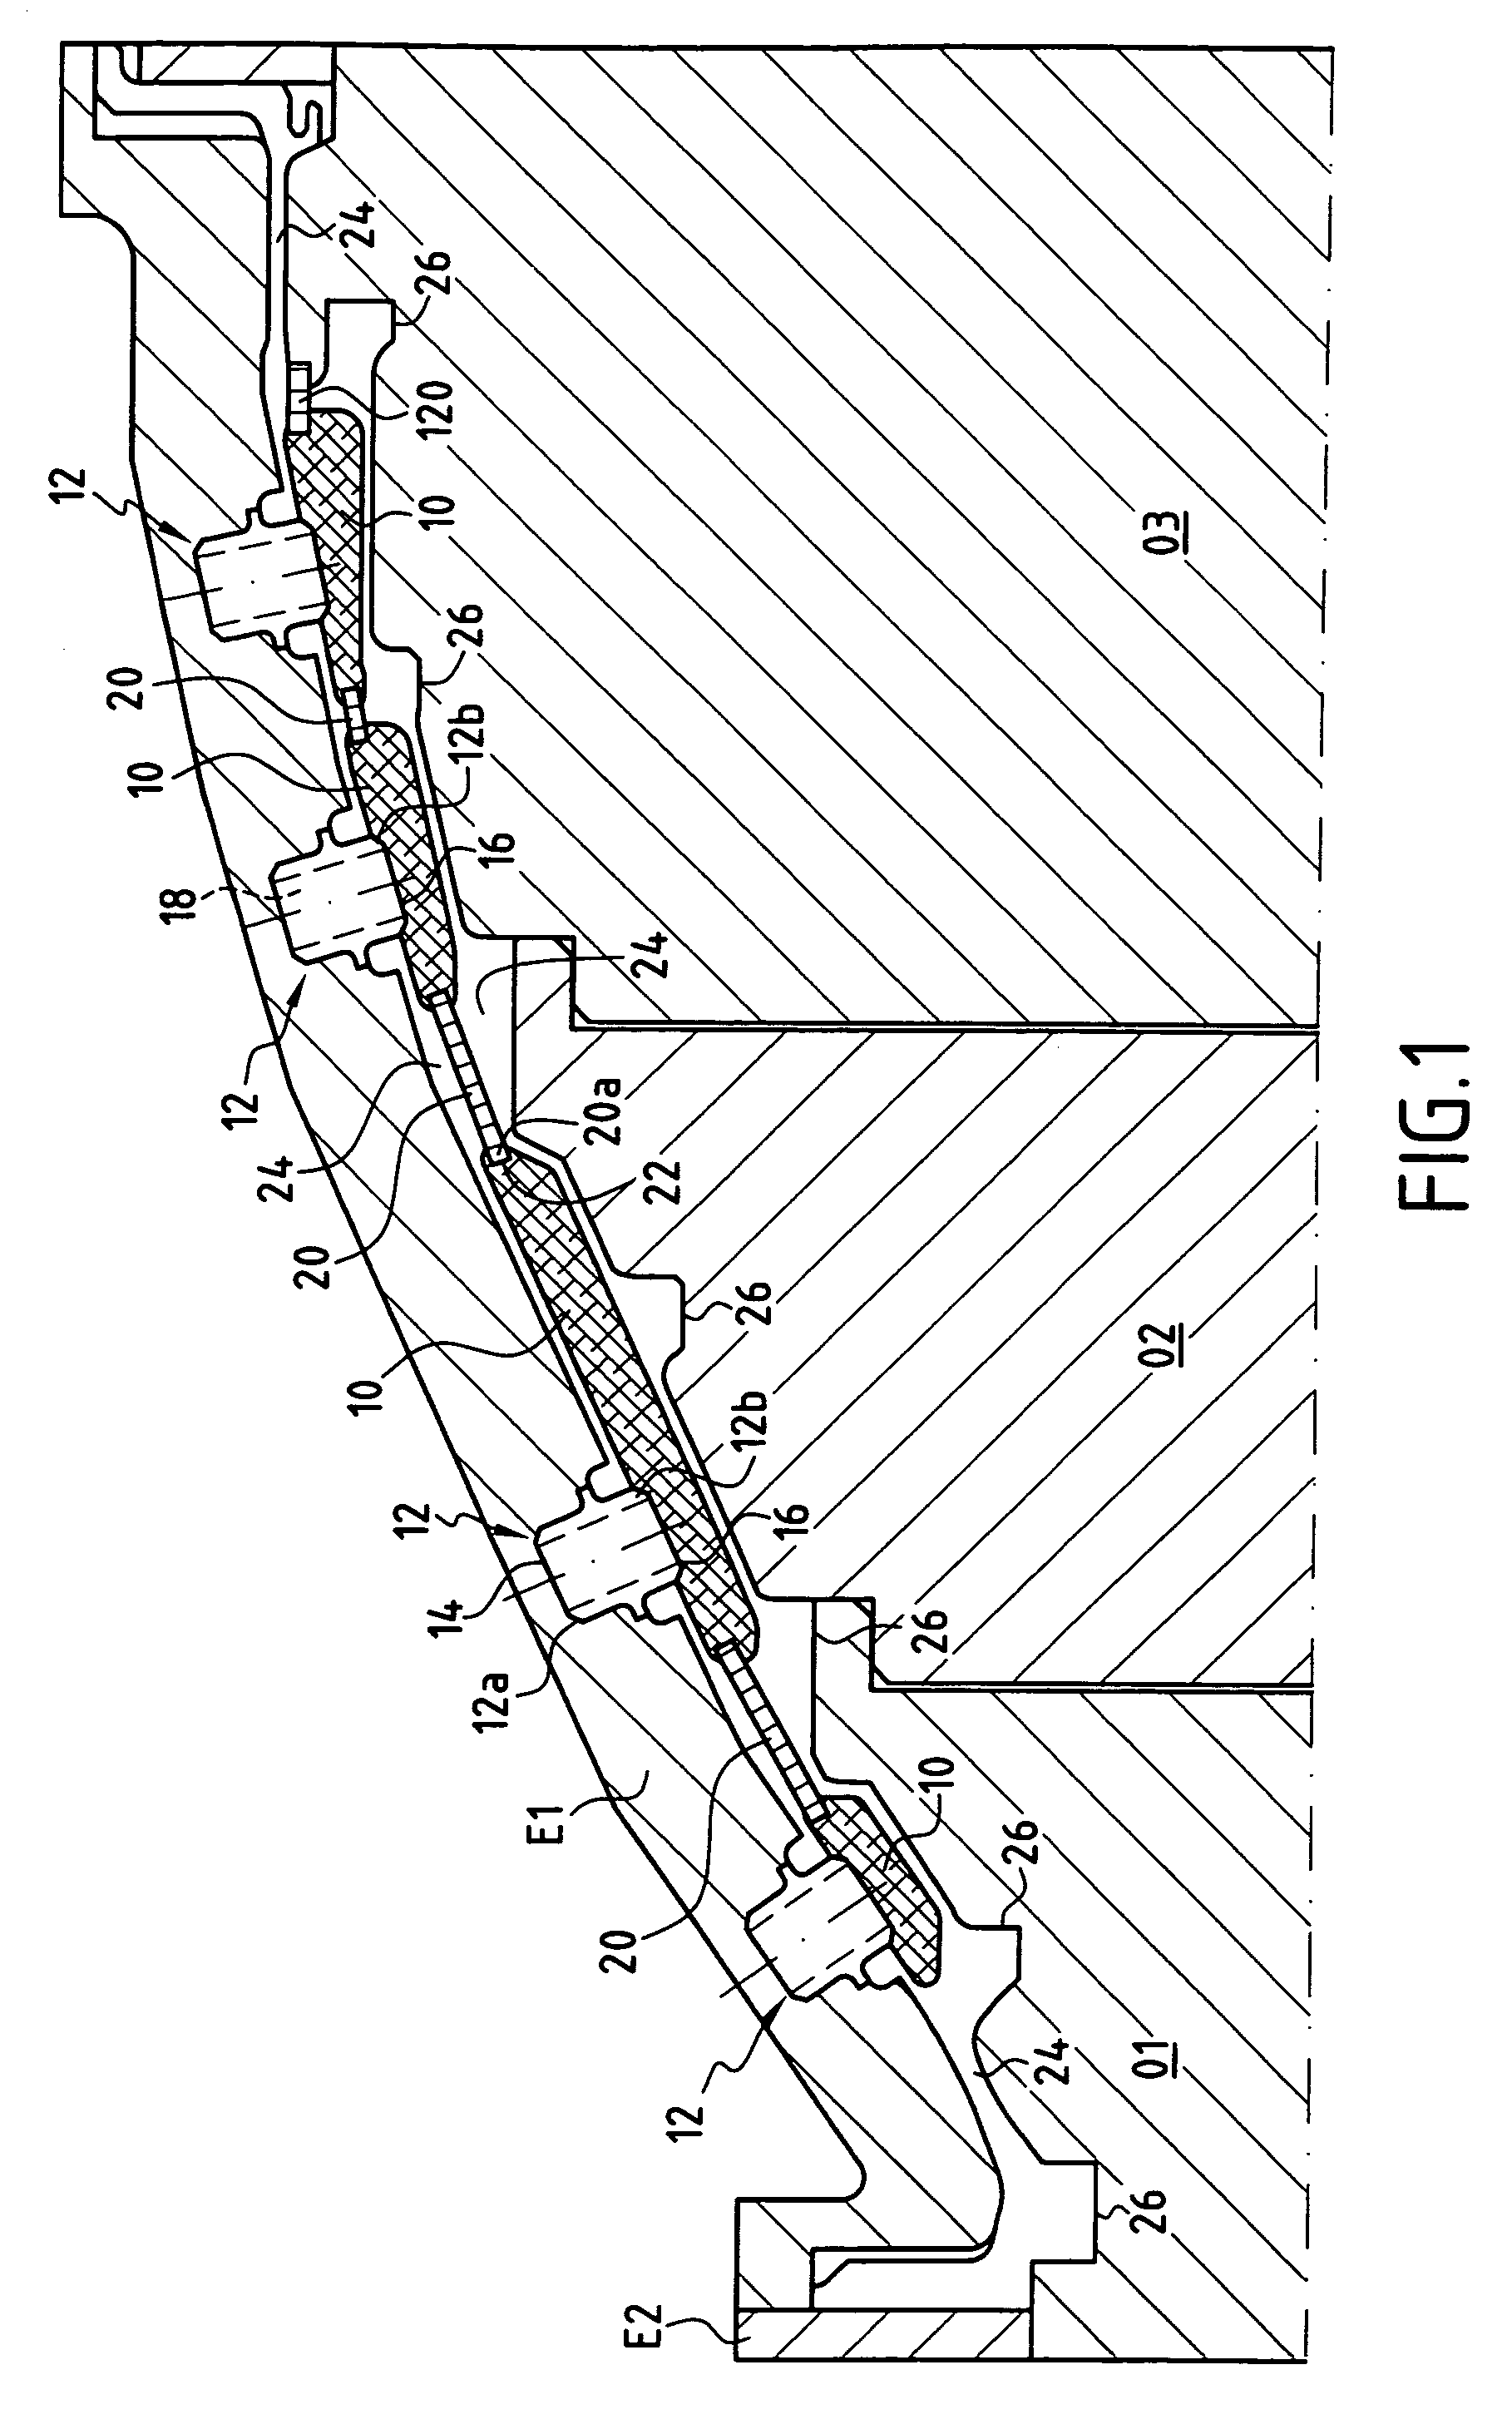 Method of fabricating a casing for turbine stator